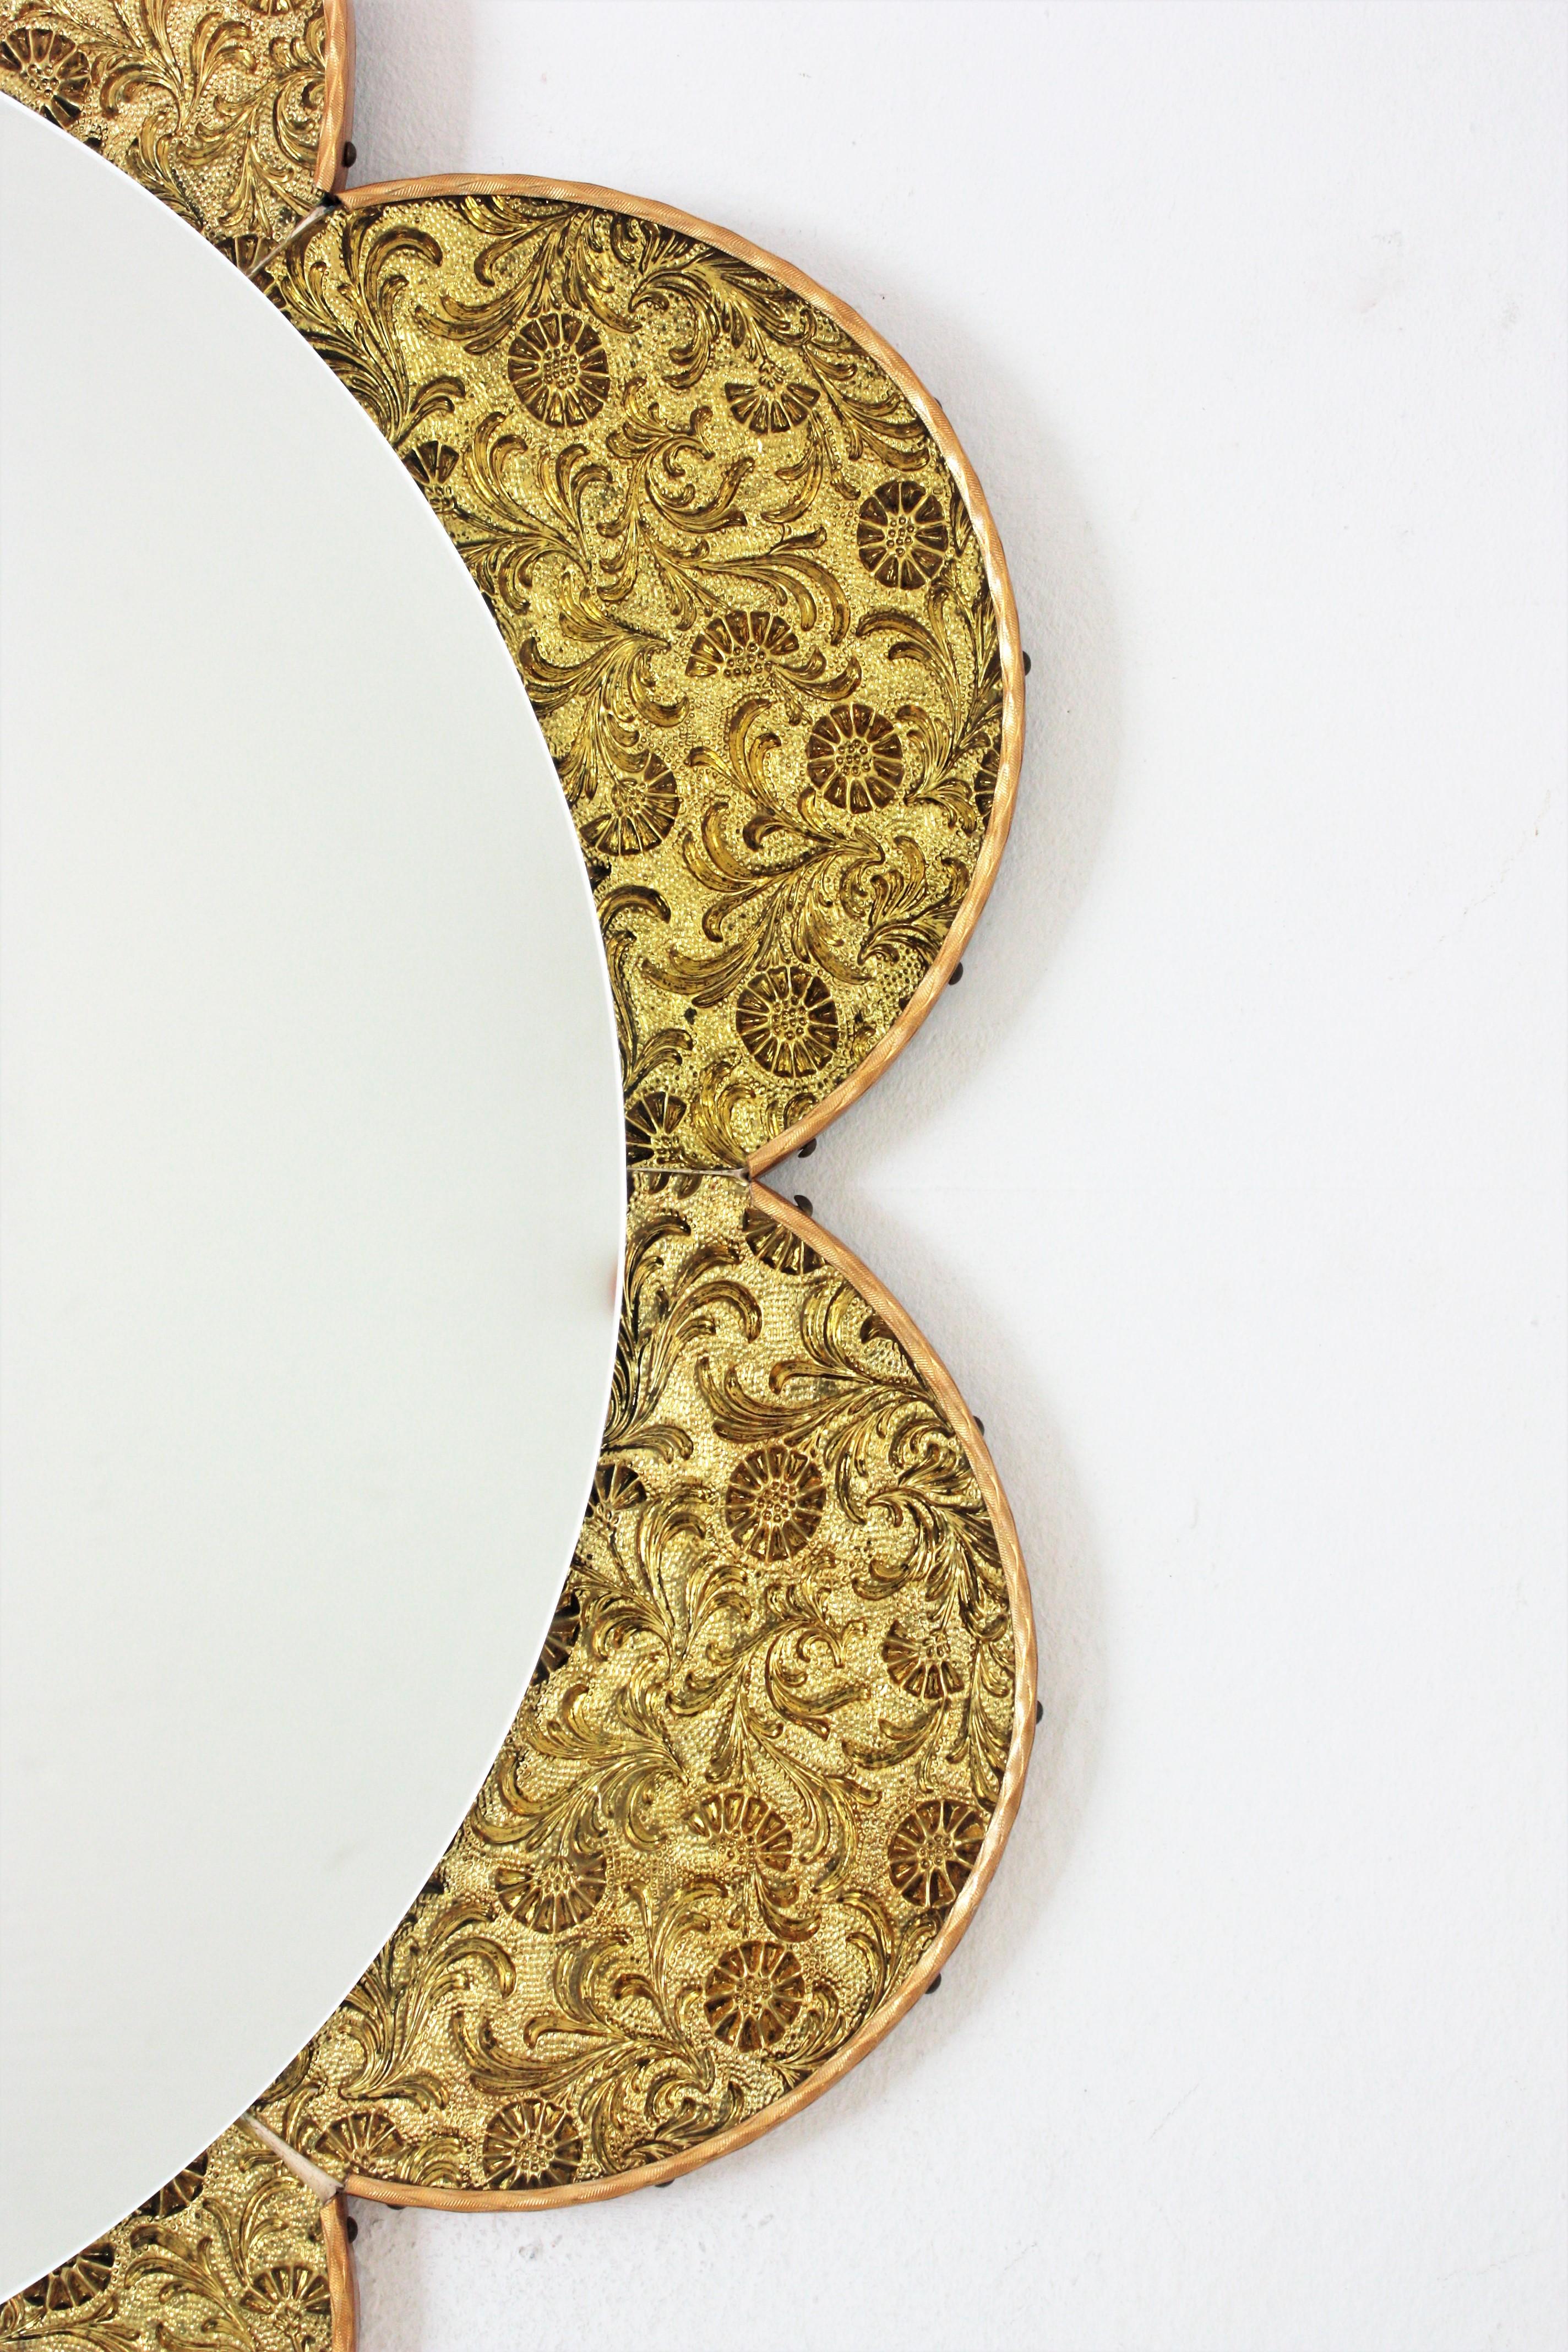 Hand-Crafted Flower Shaped Mirror with Golden Glass Petals For Sale